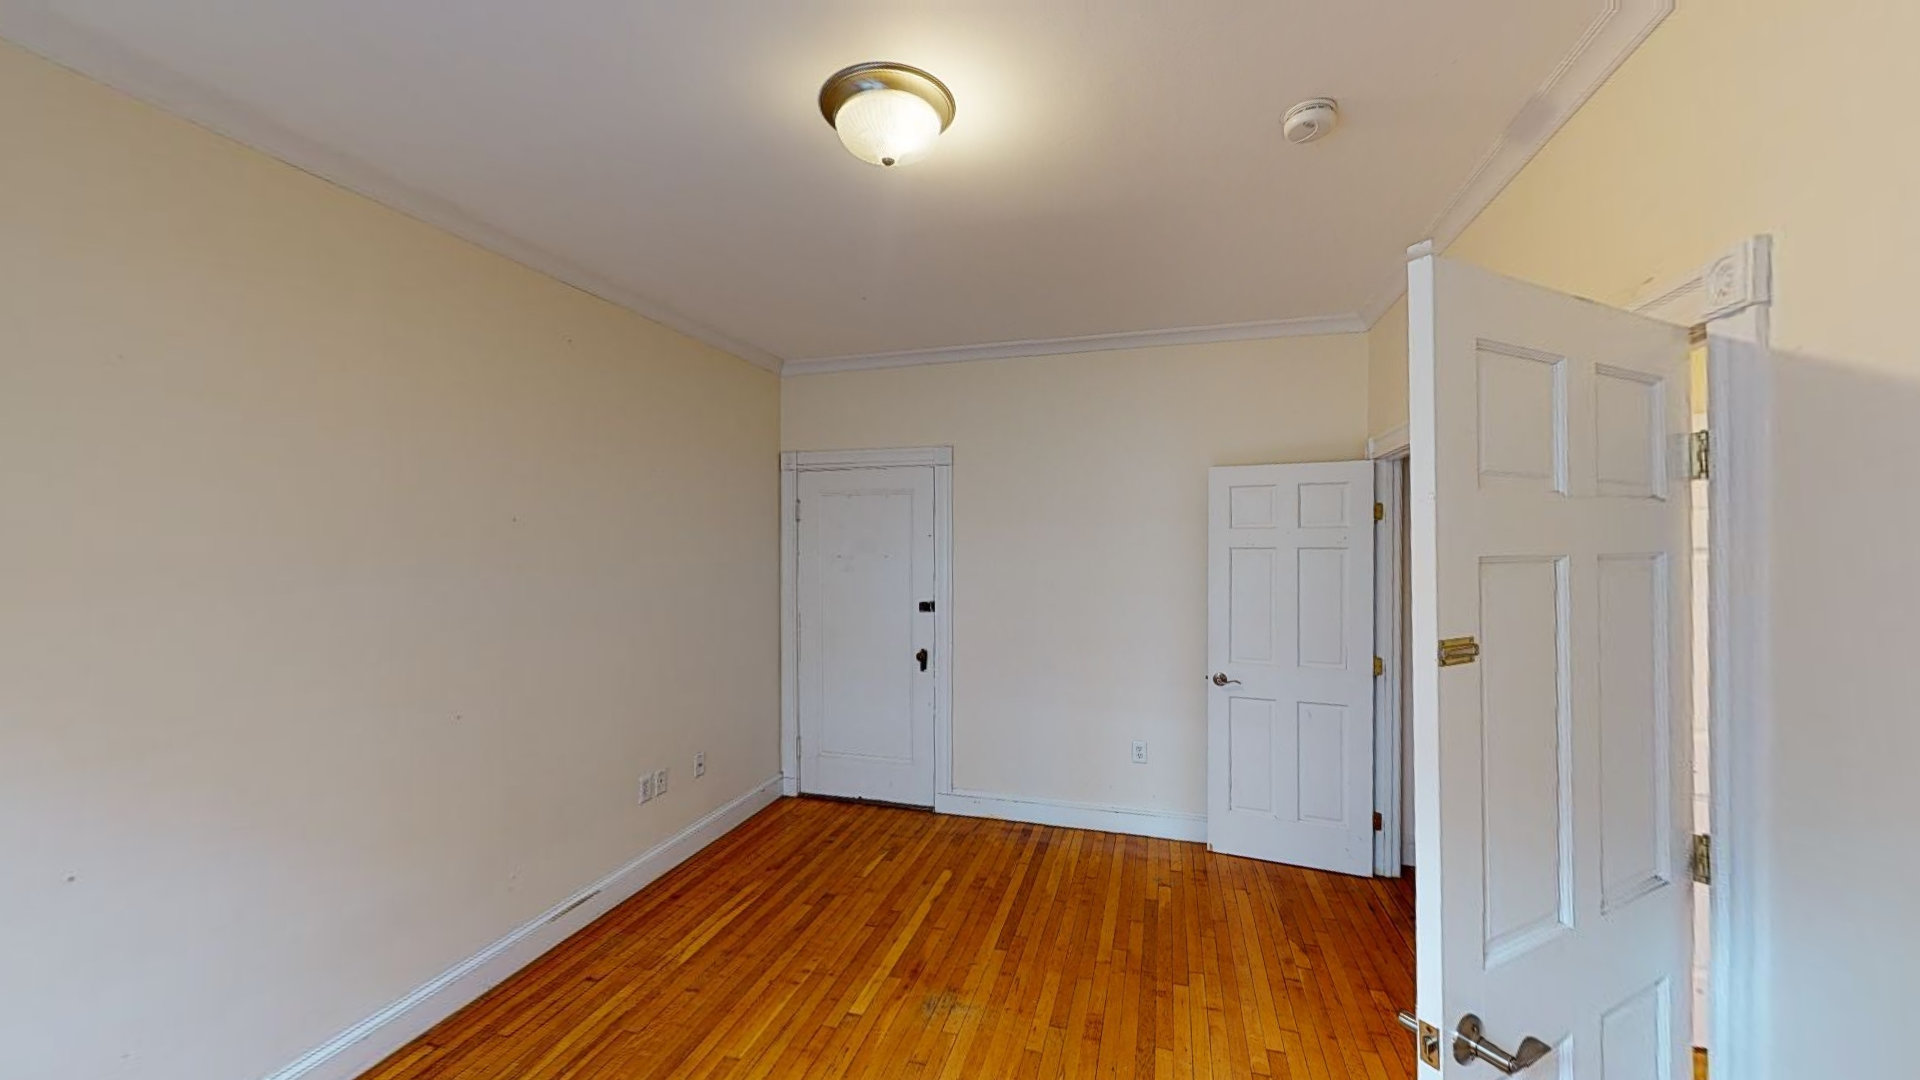 Photos of apartment on Glenville Ave.,Boston MA 02134